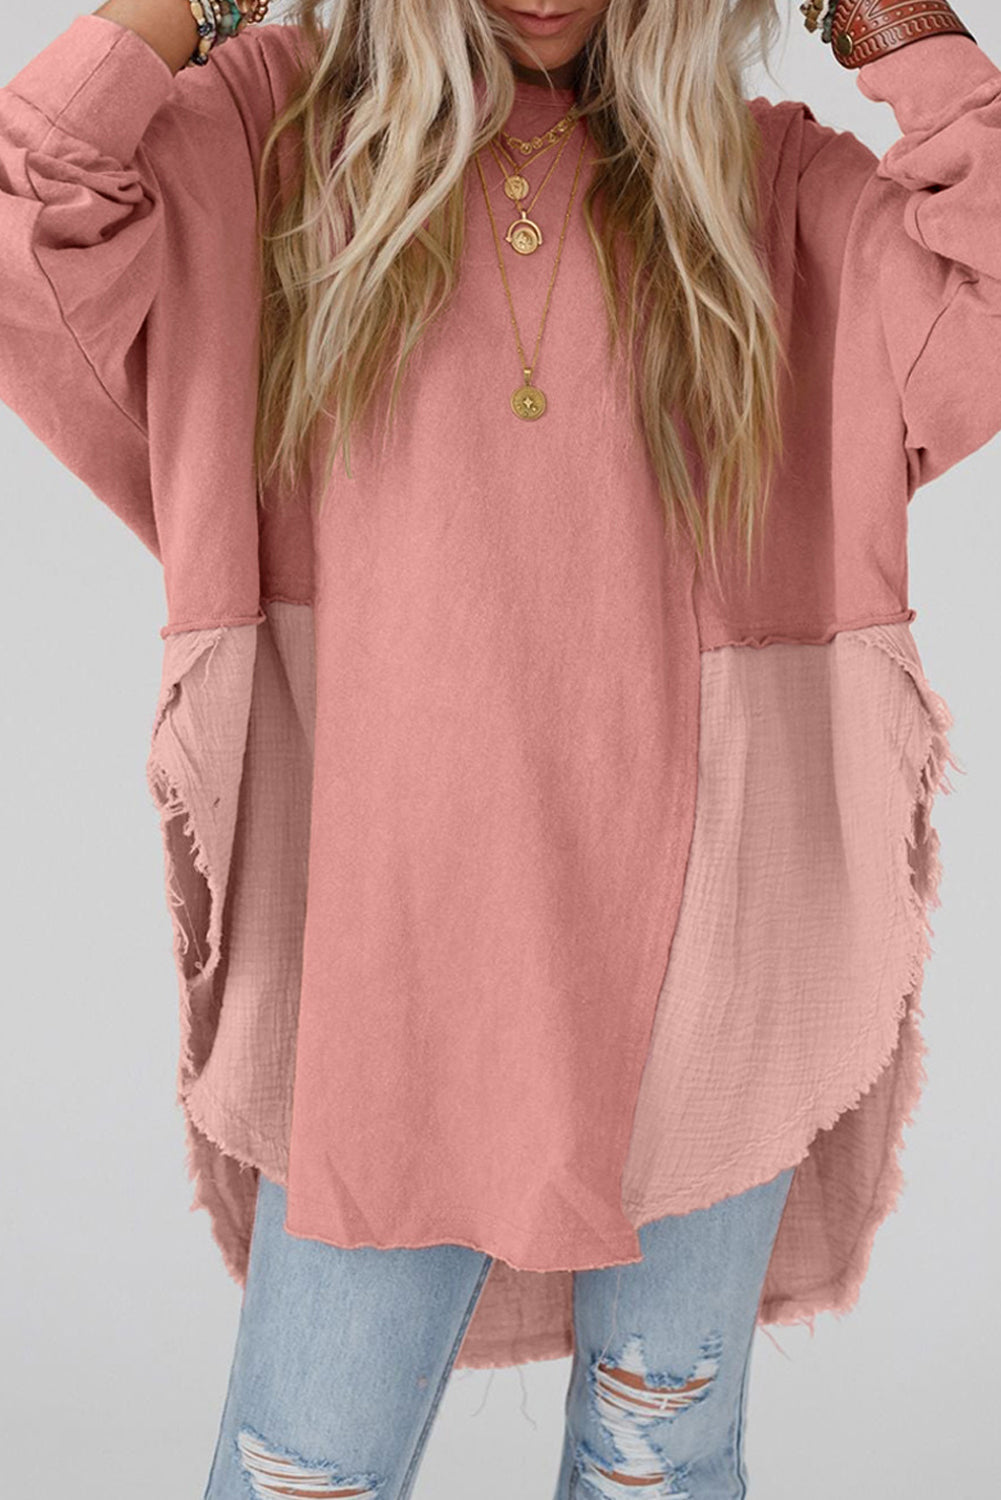 Rose pink crinkle splicing raw hem high low oversized blouse - s / 80% polyester + 20% cotton - tops